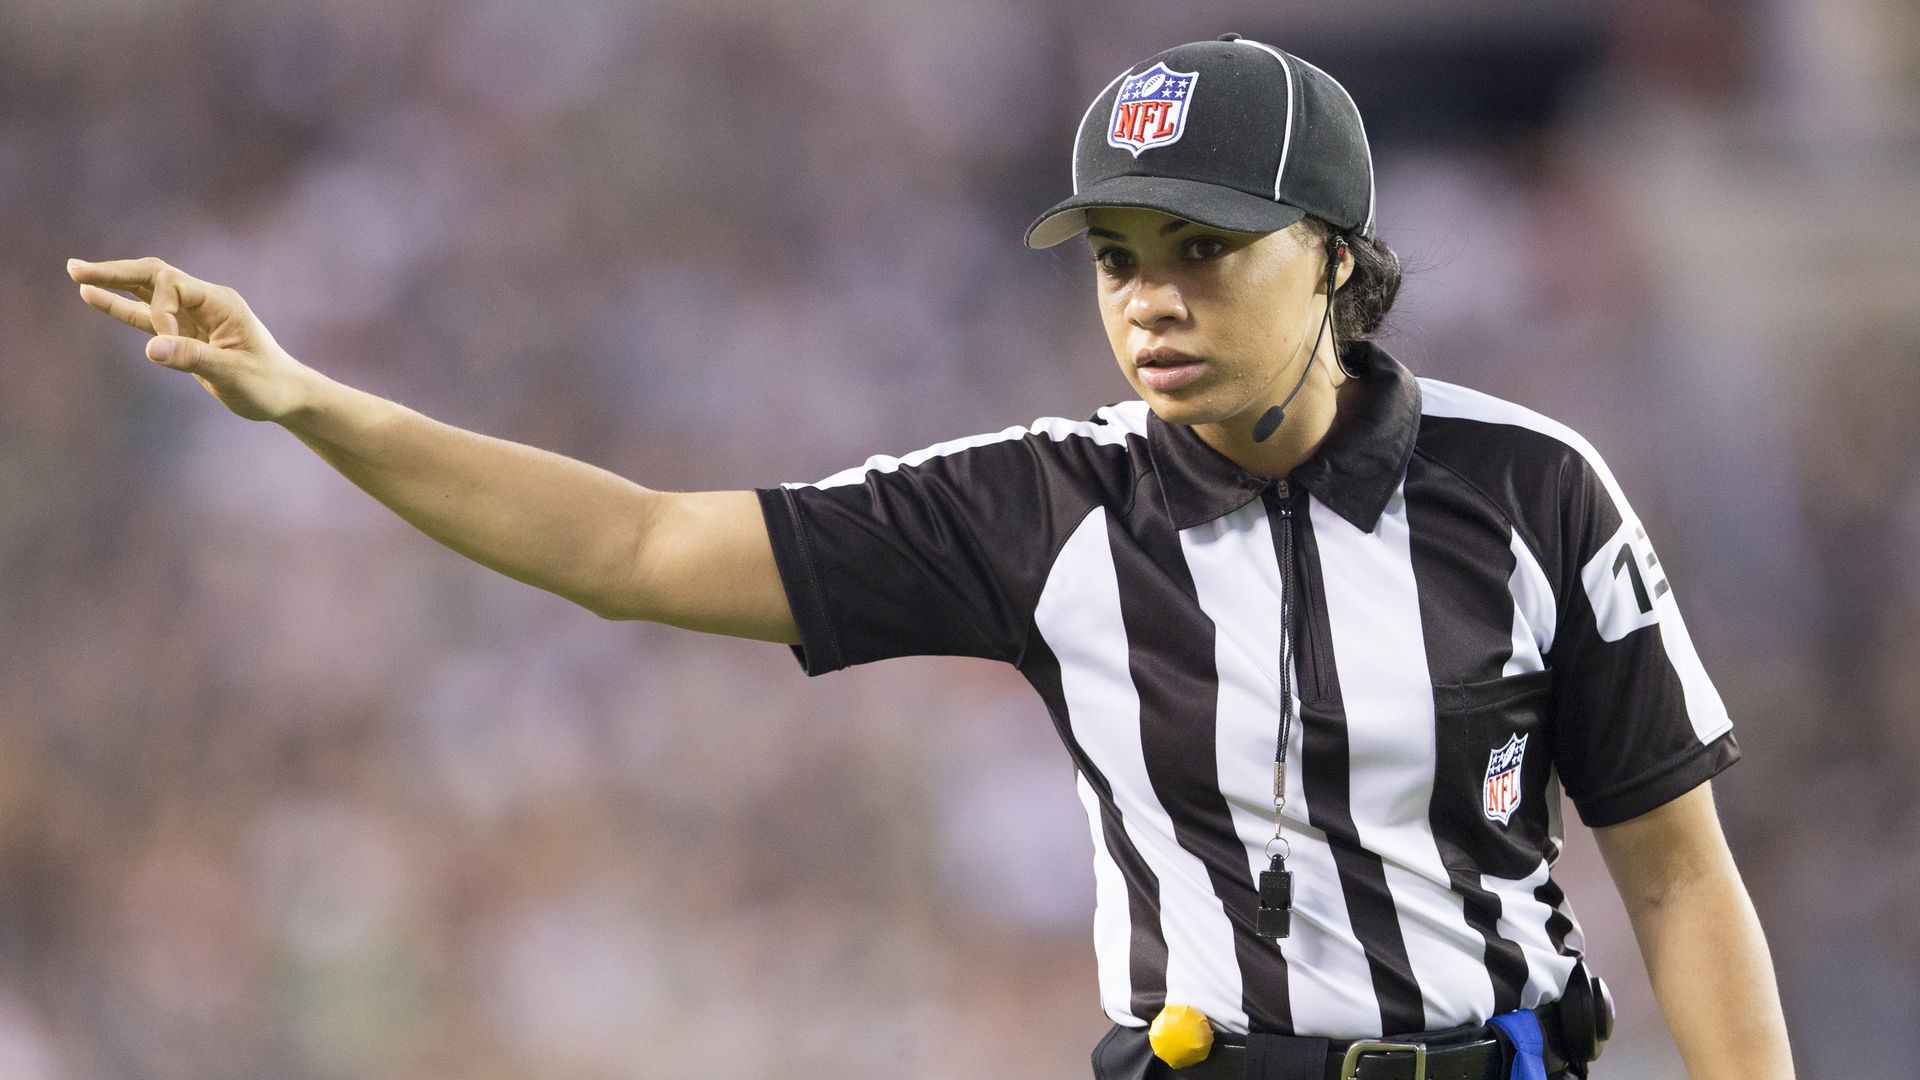 Photo of Maia Chaka in uniform as game official on the field